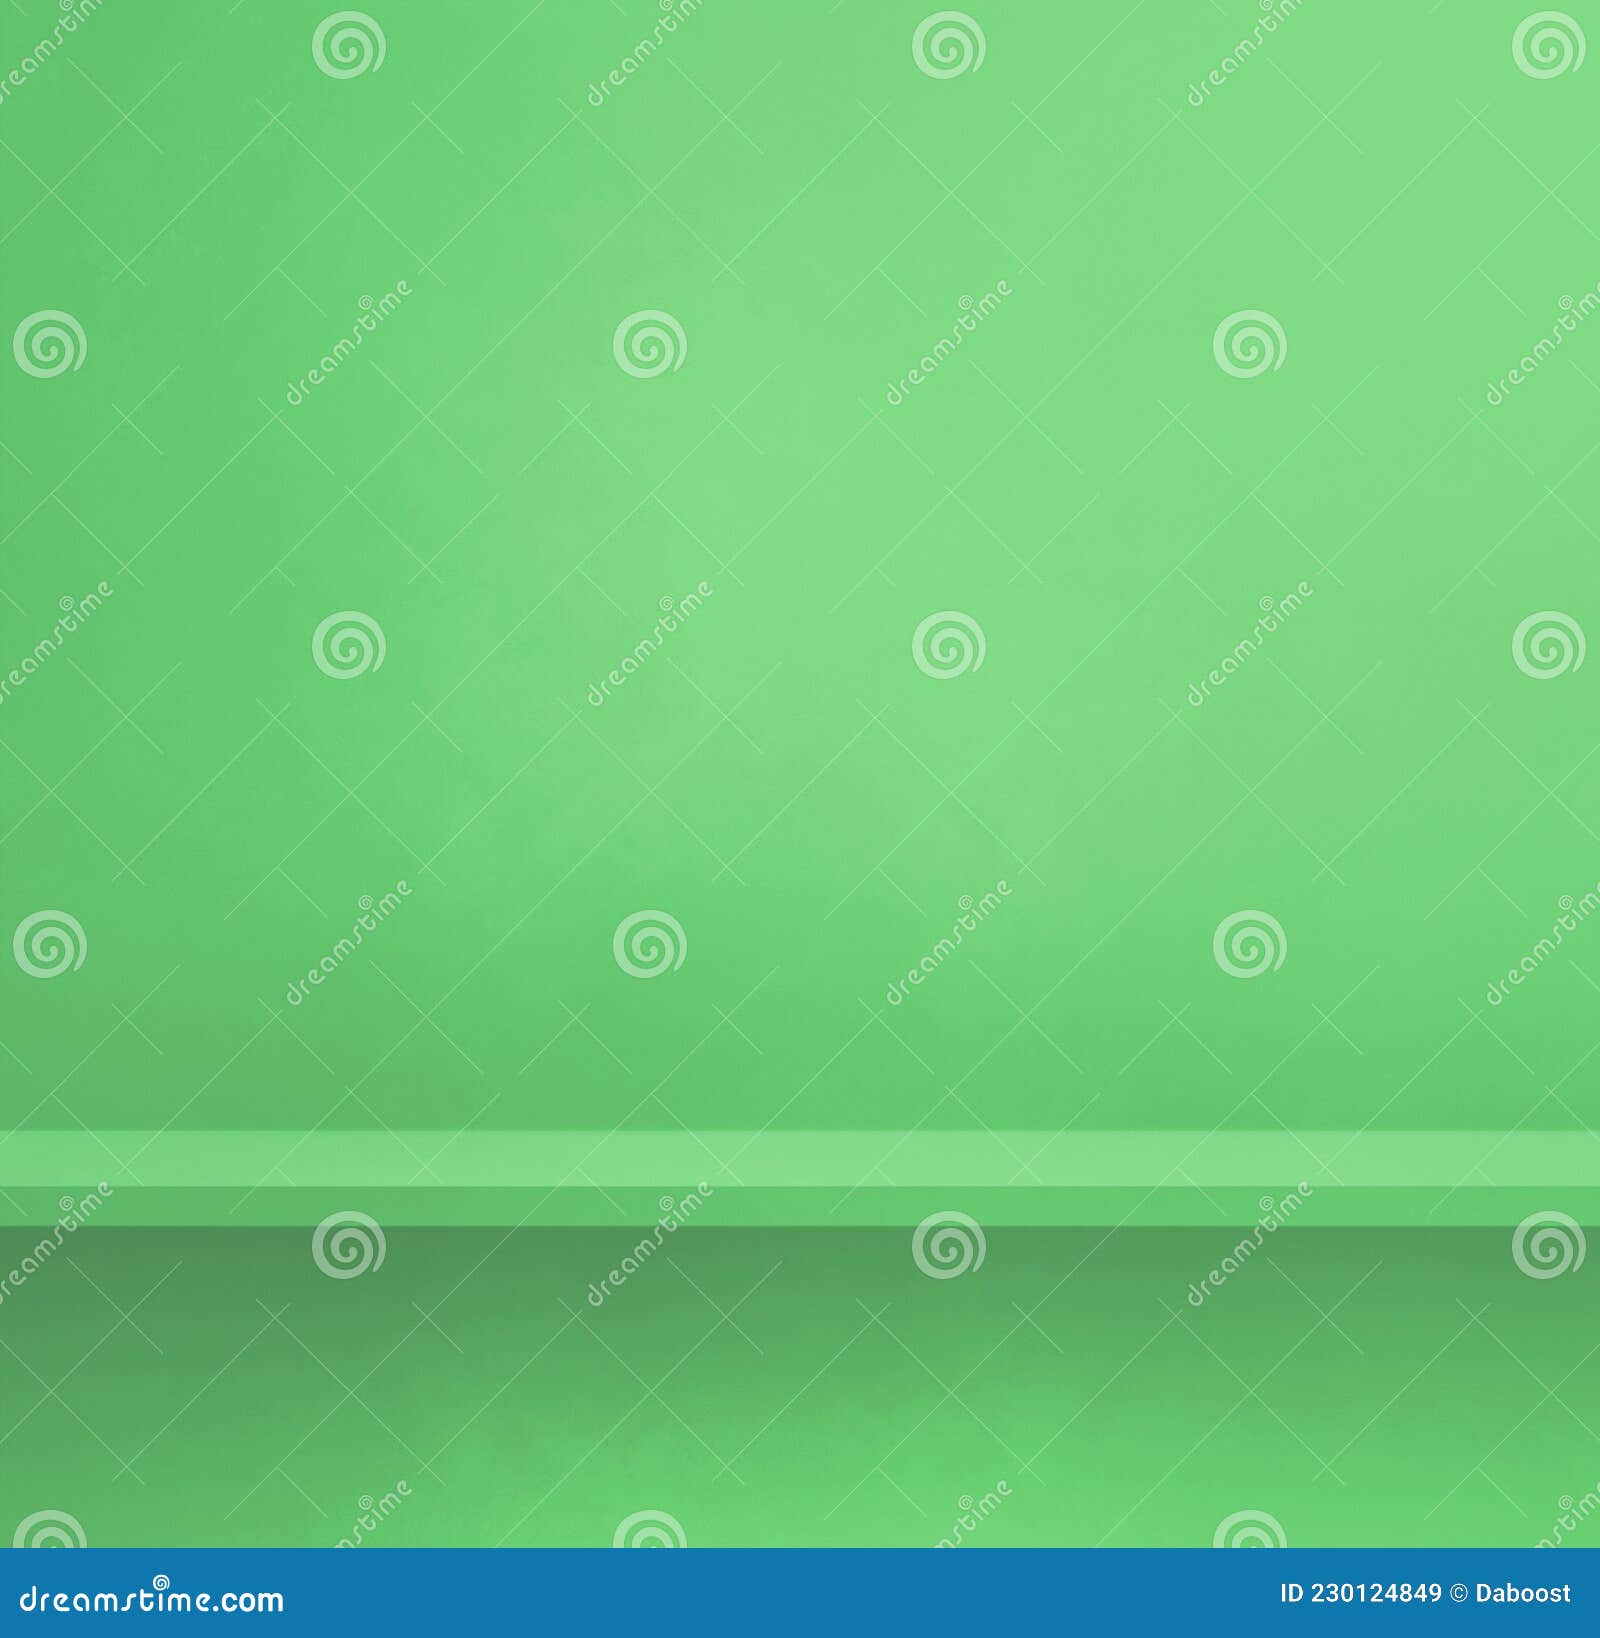 Empty shelf on a green wall. Background template scene. Square banner